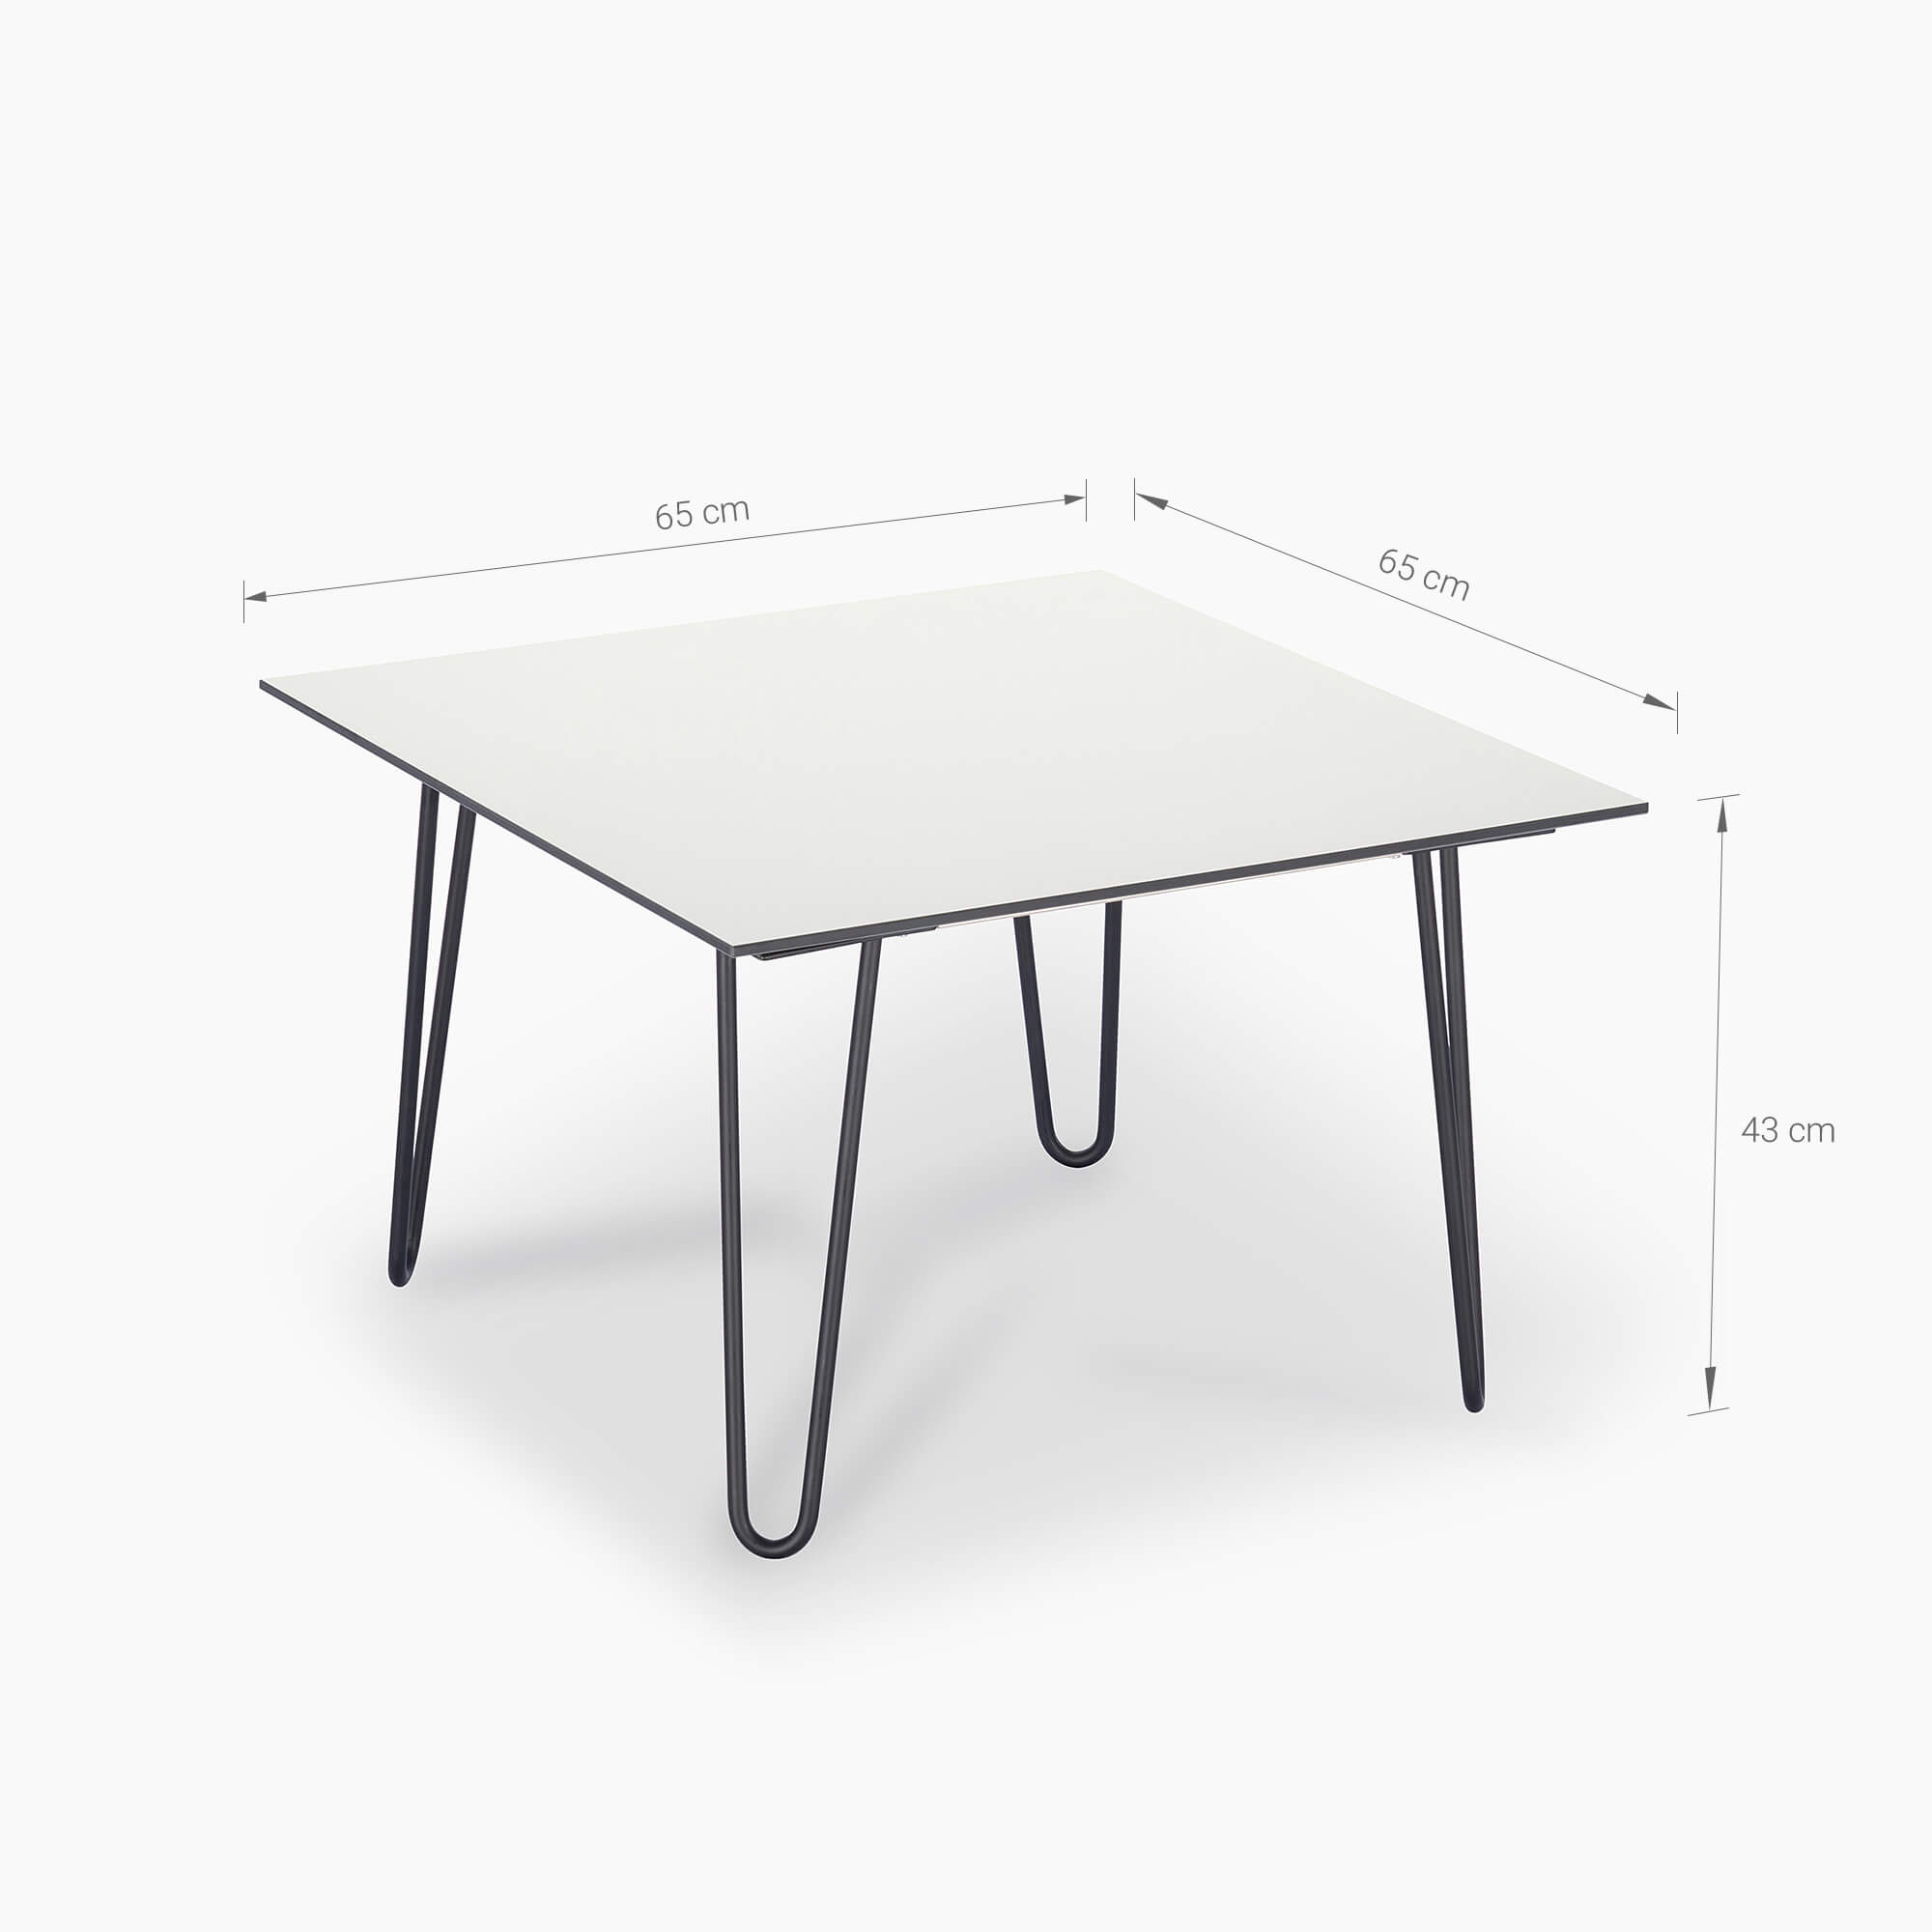 Small-white-coffee-table-65x65cm-janEven